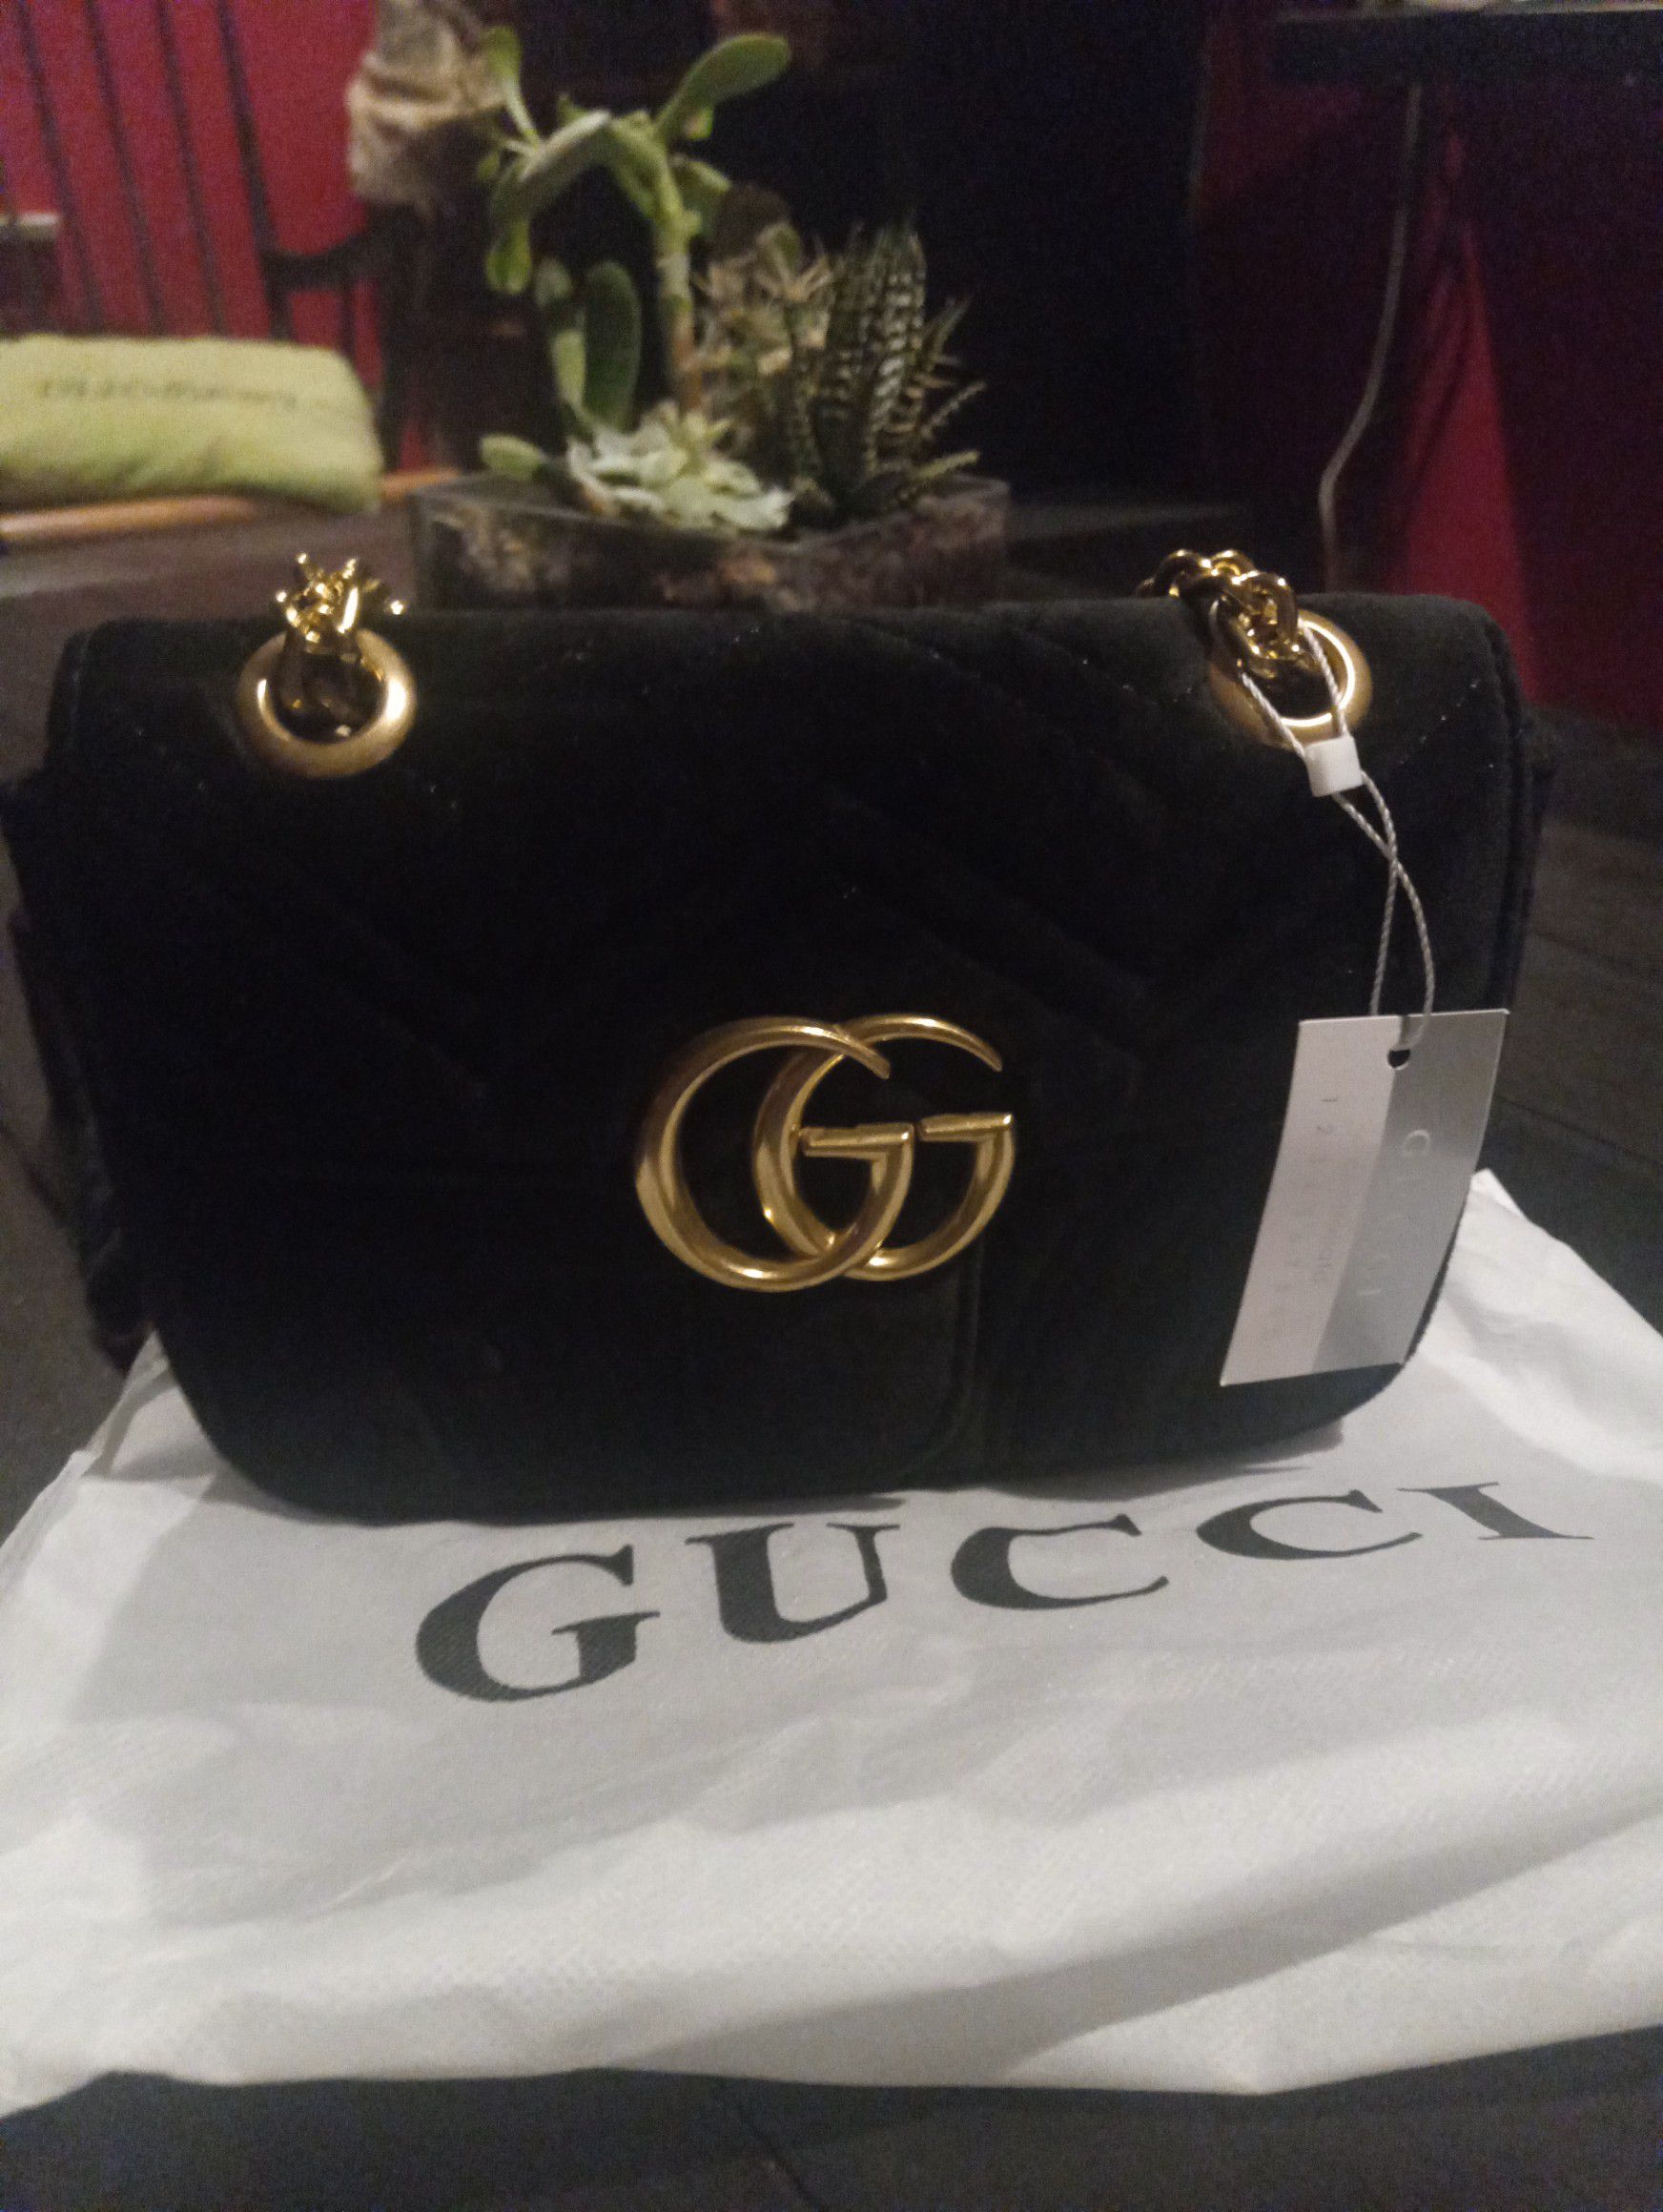 Gucci bag $450 no returns I don't think is authentic but she'll never tell.